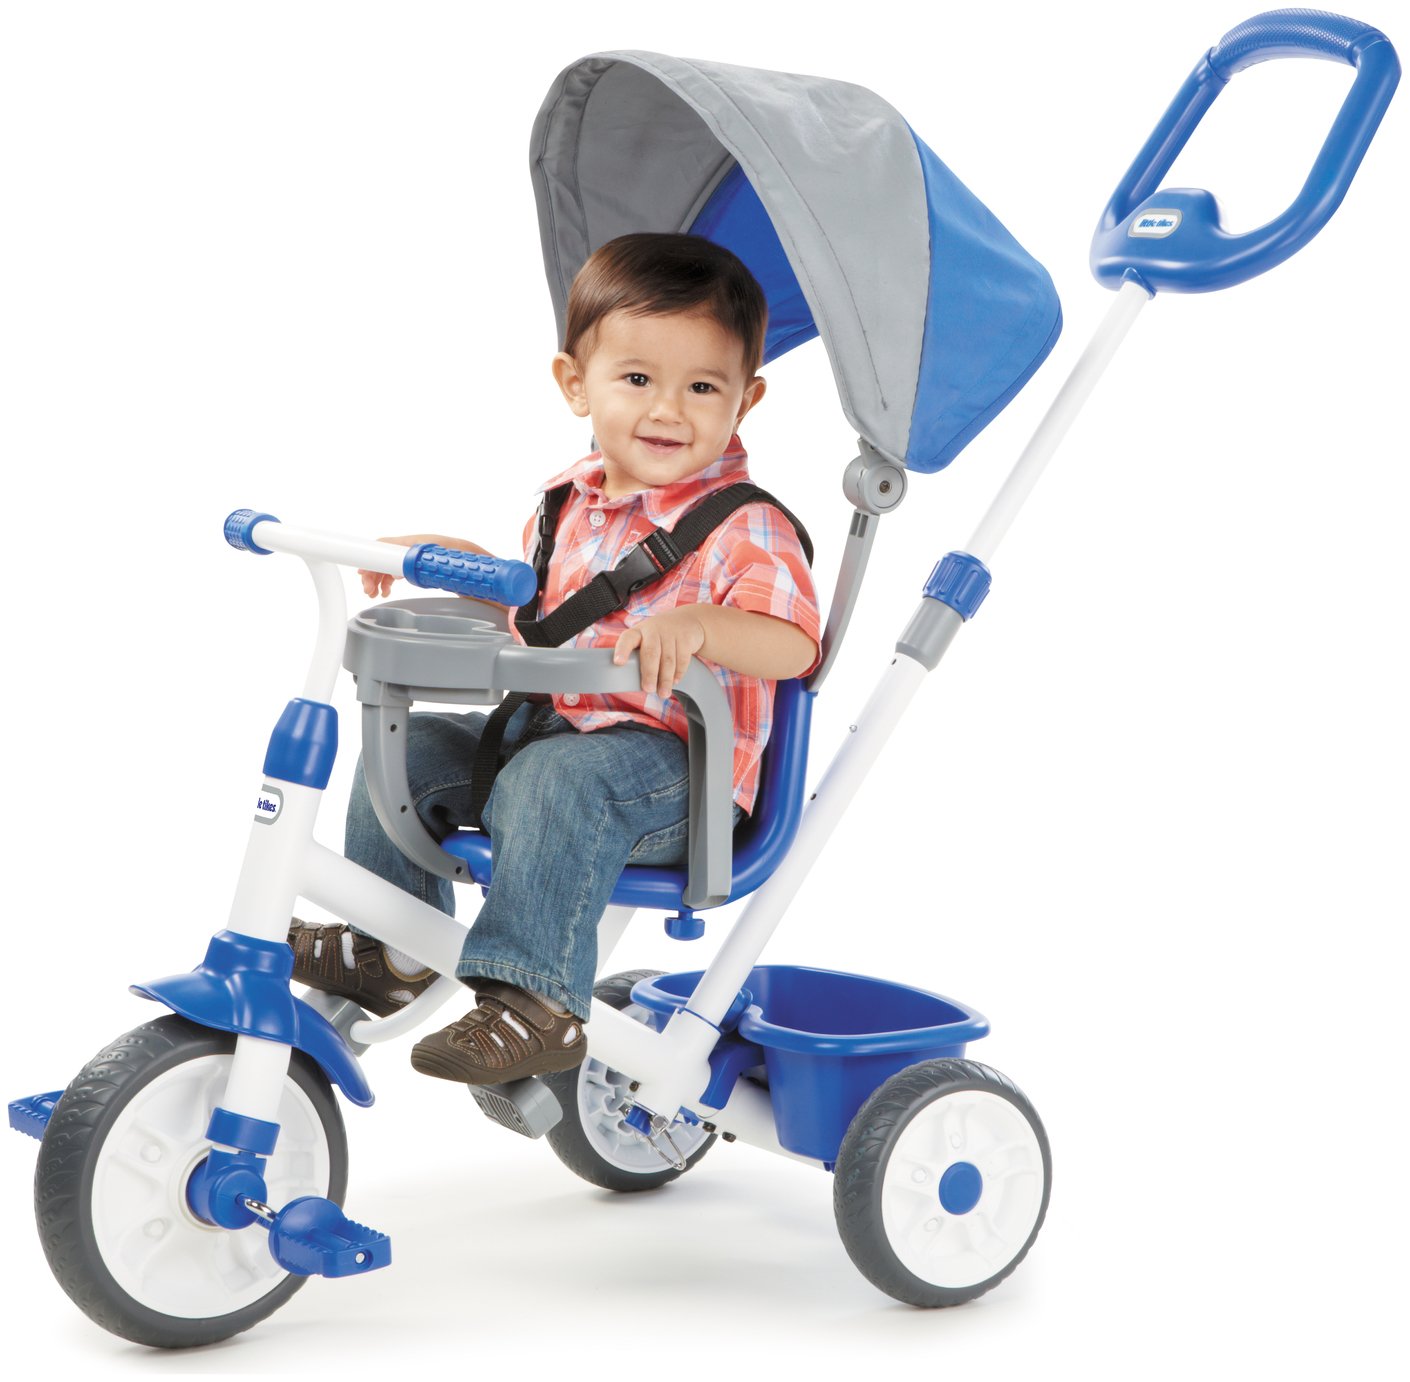 Little Tikes 4-in-1 My First Trike Review